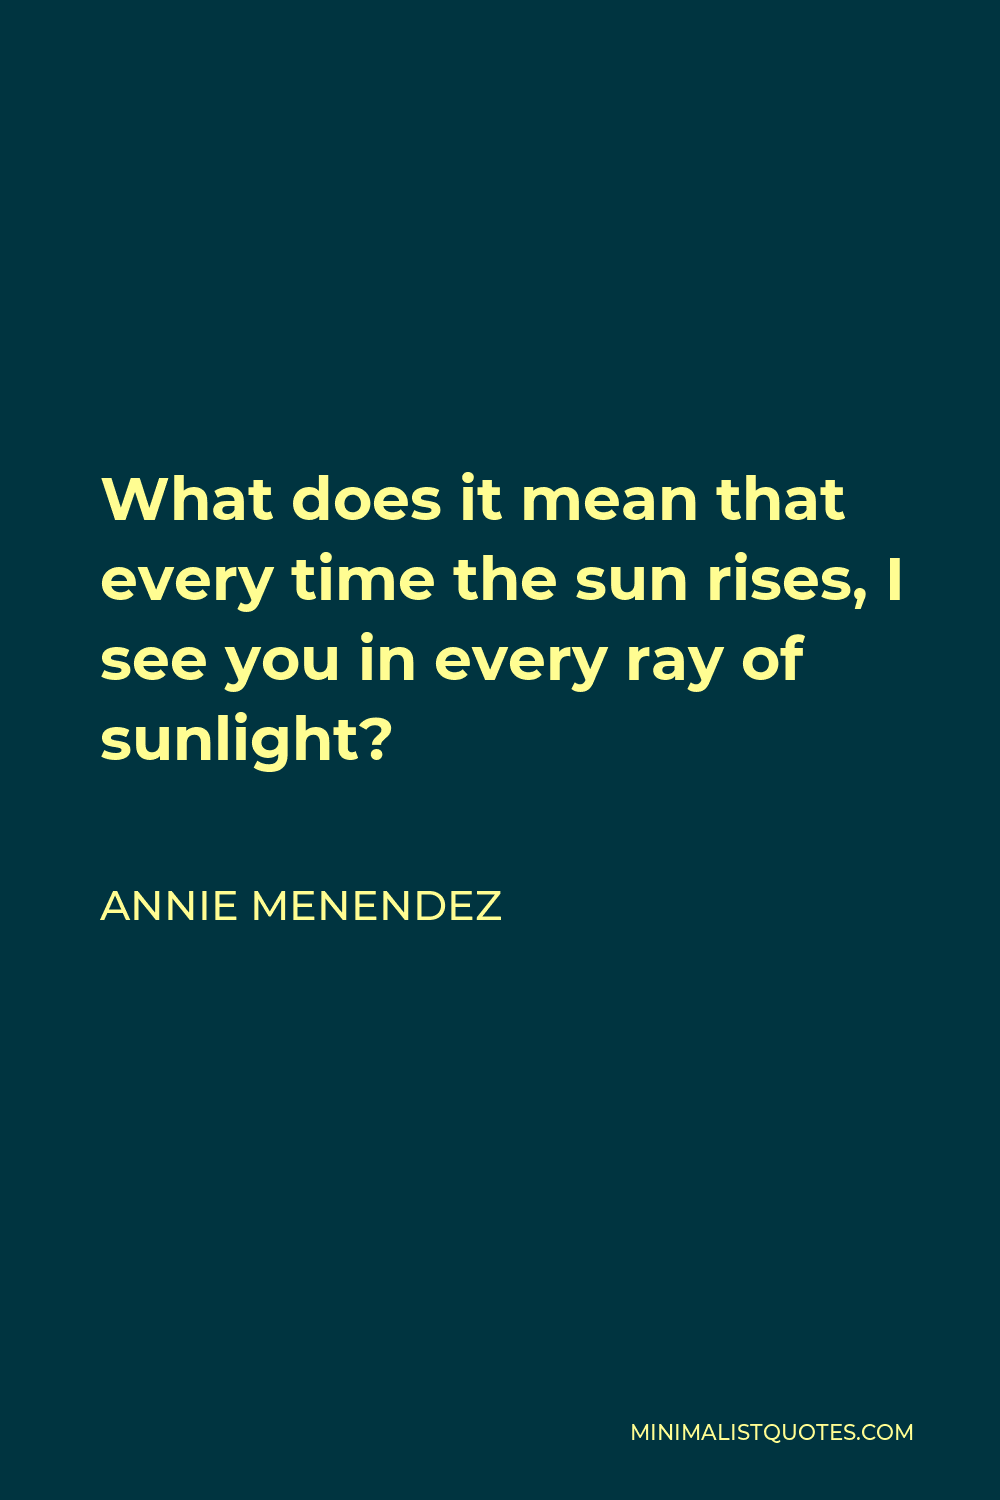 Annie Menendez Quote - What does it mean that every time the sun rises, I see you in every ray of sunlight?